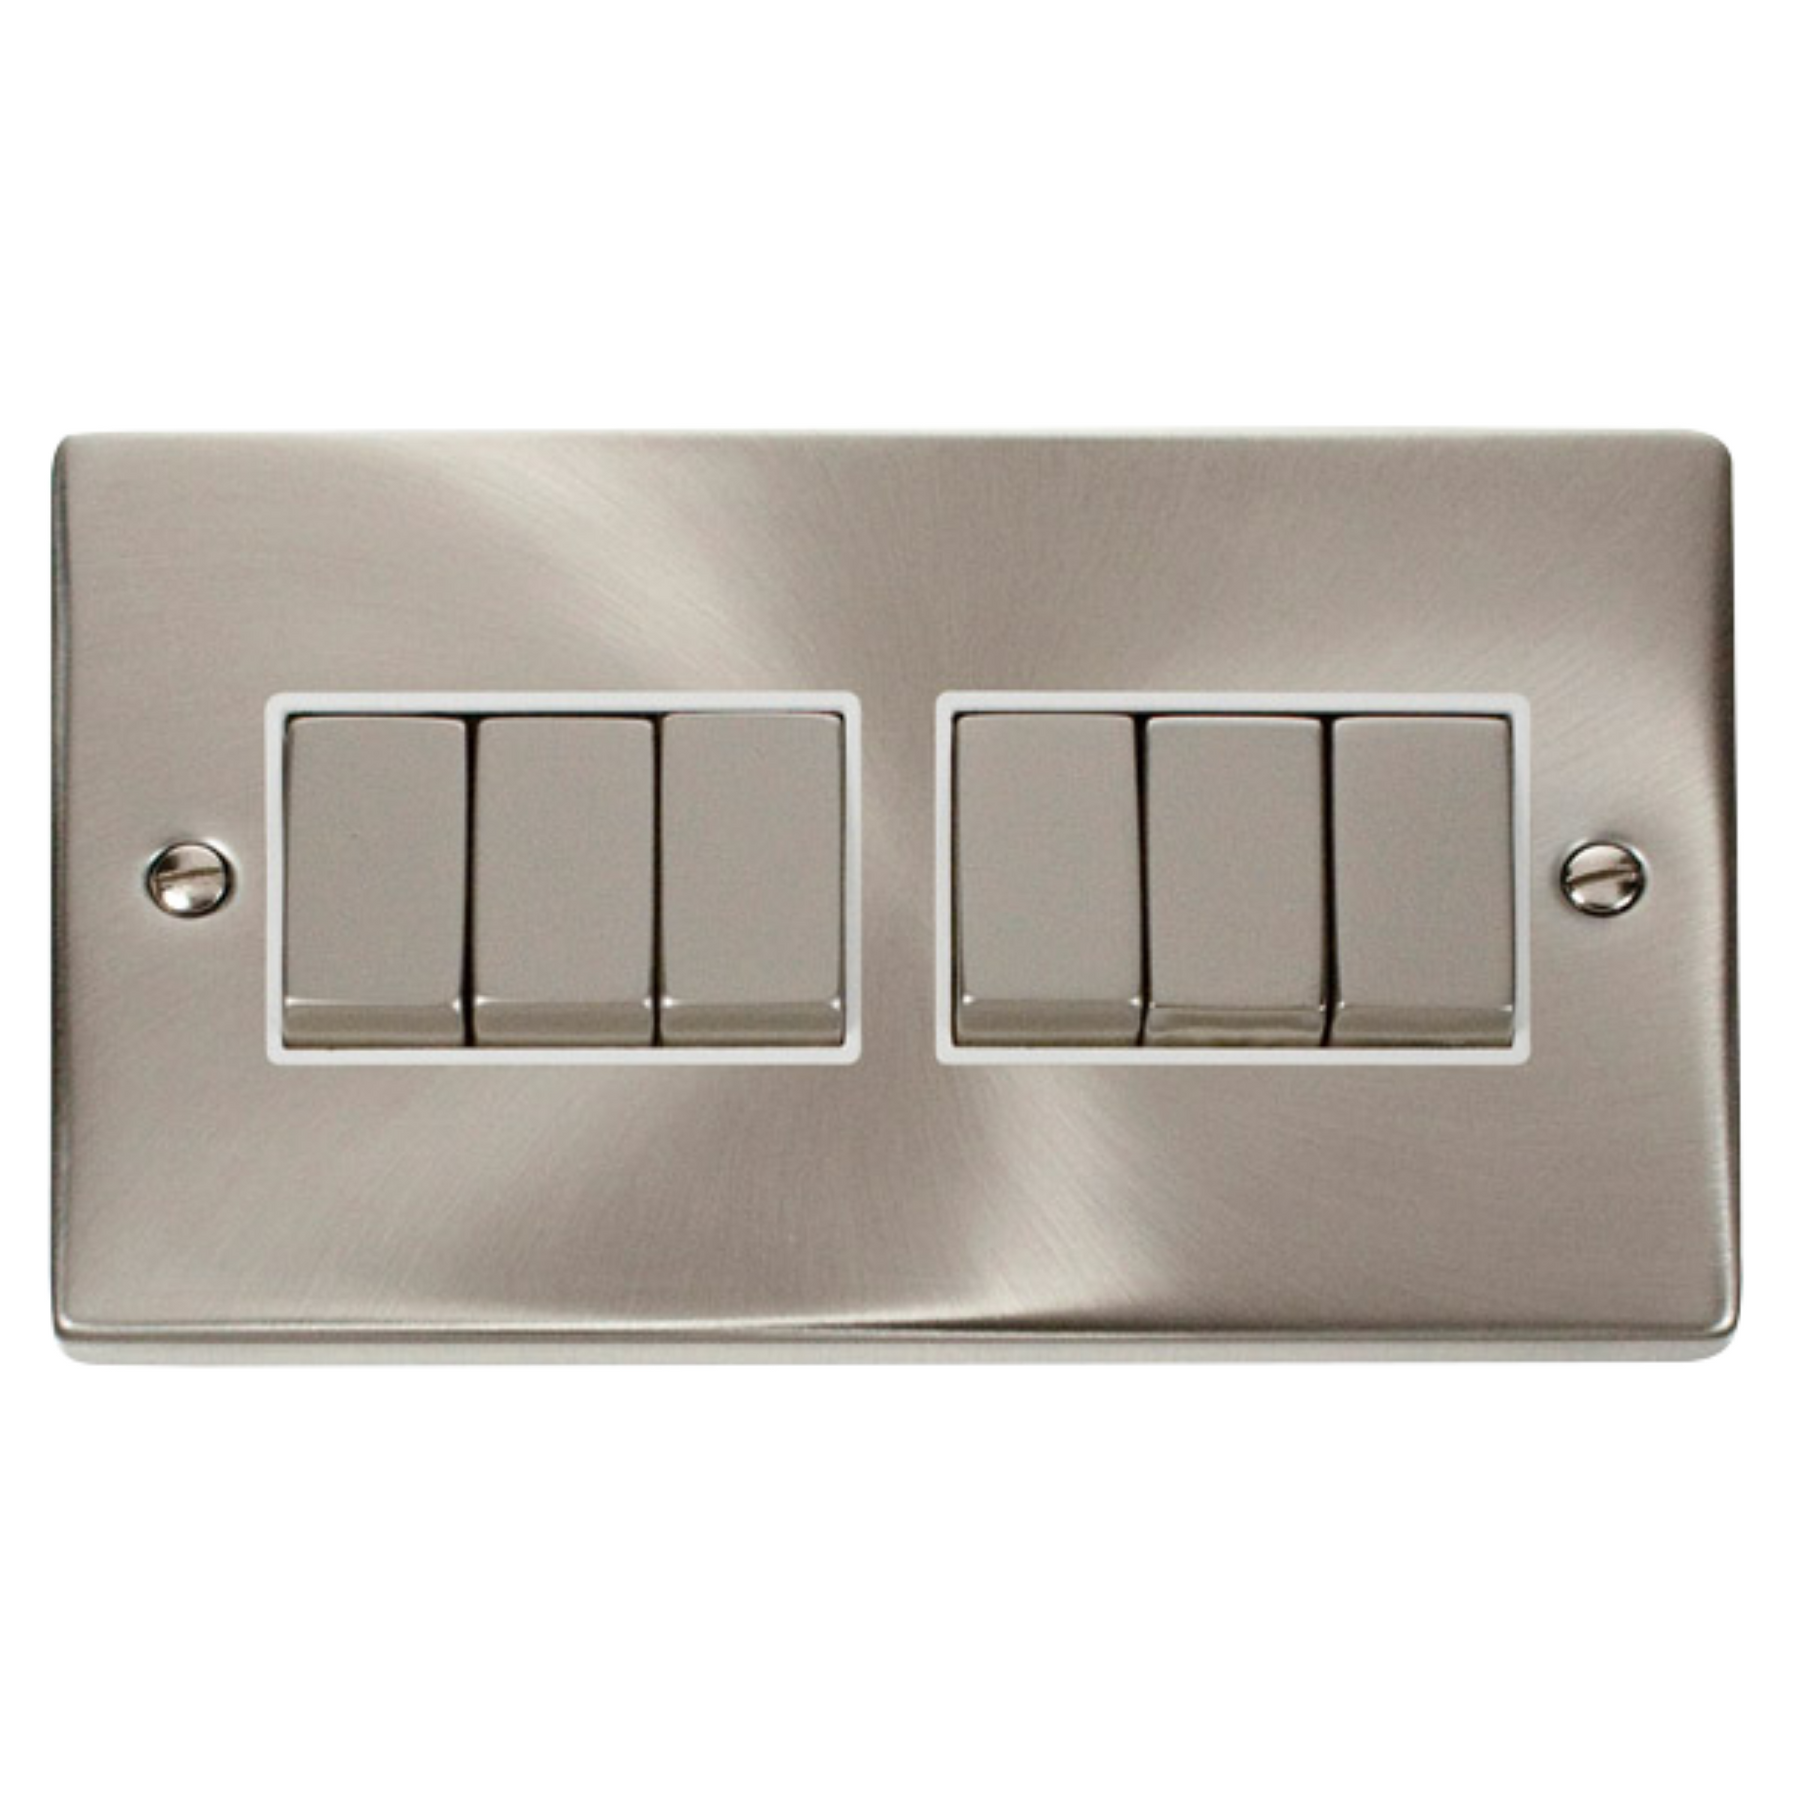 Z-Wave Smart Dimmer Switch in Satin Chrome